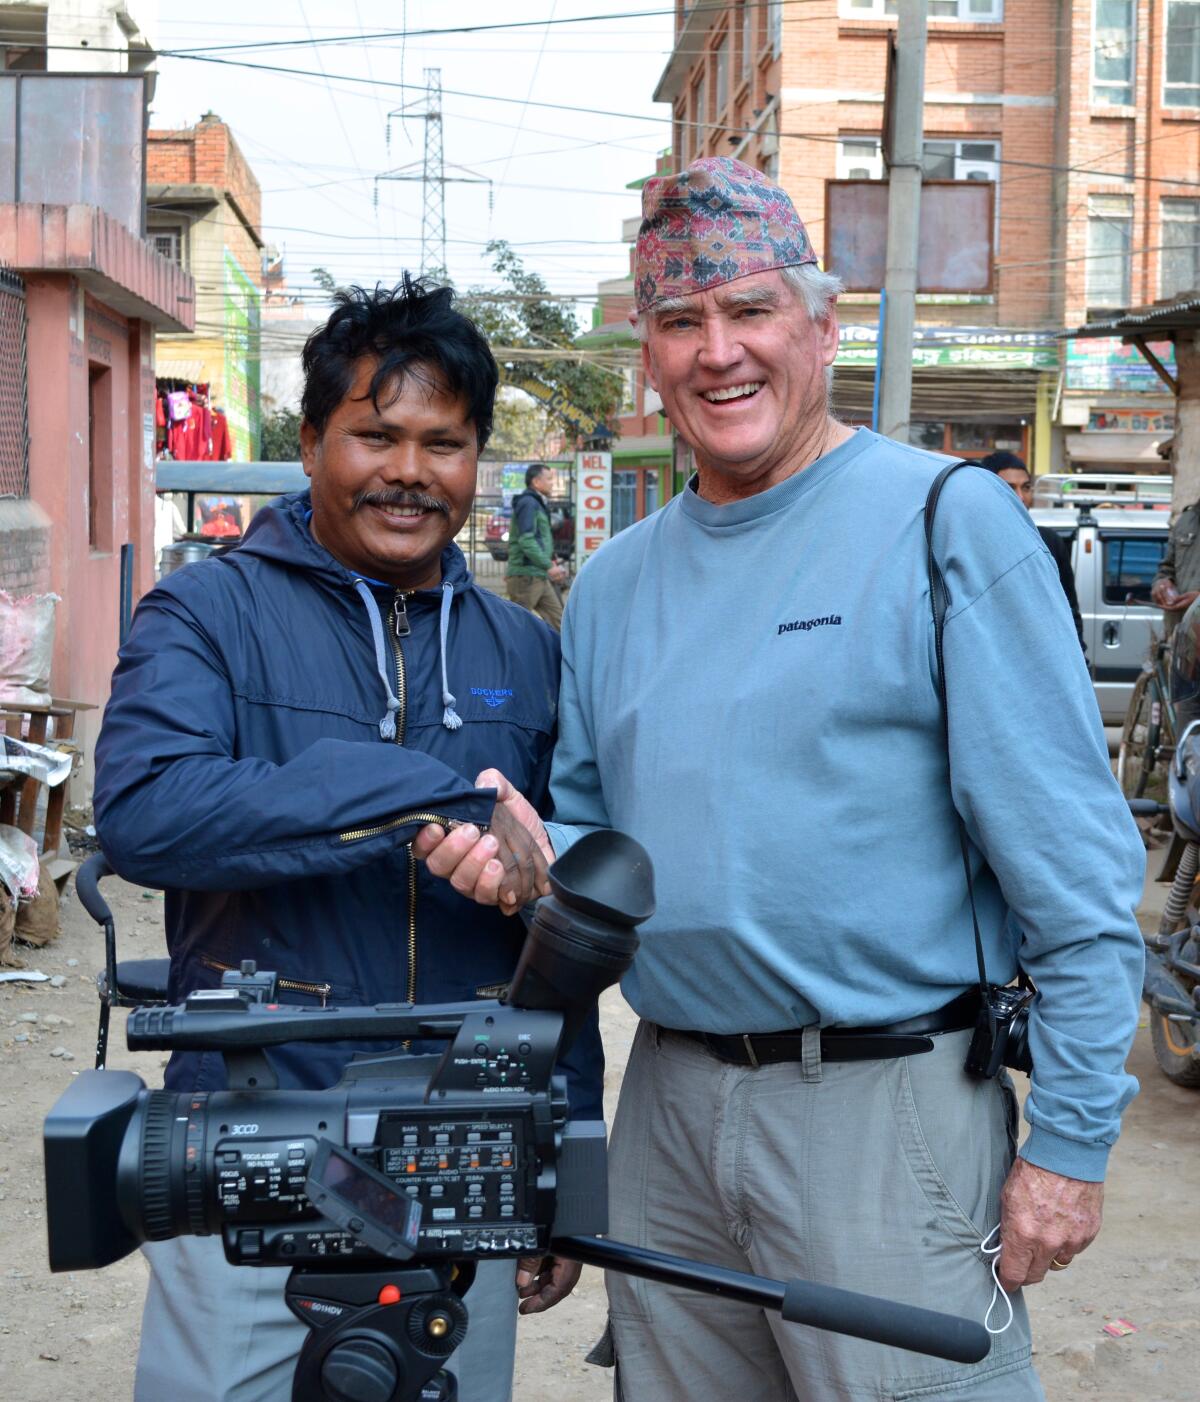 San Diego filmmaker Ron Ranson, right, is shown with truck painter Kunil Kumar Choudary on location in Nepal.